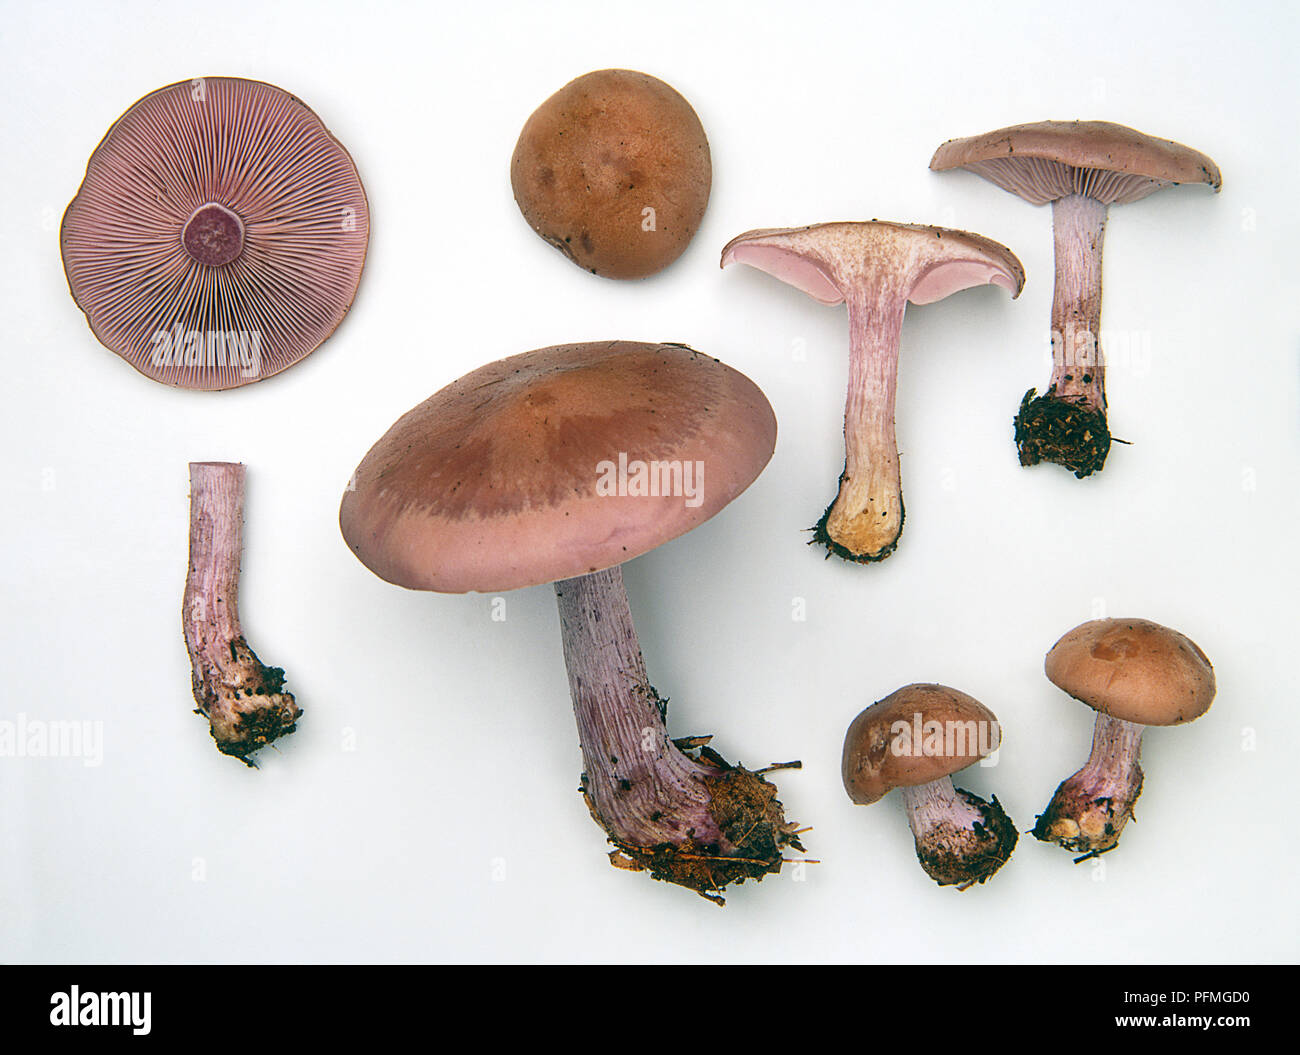 Examples of Lepista nuda (Wood blewit) Stock Photo